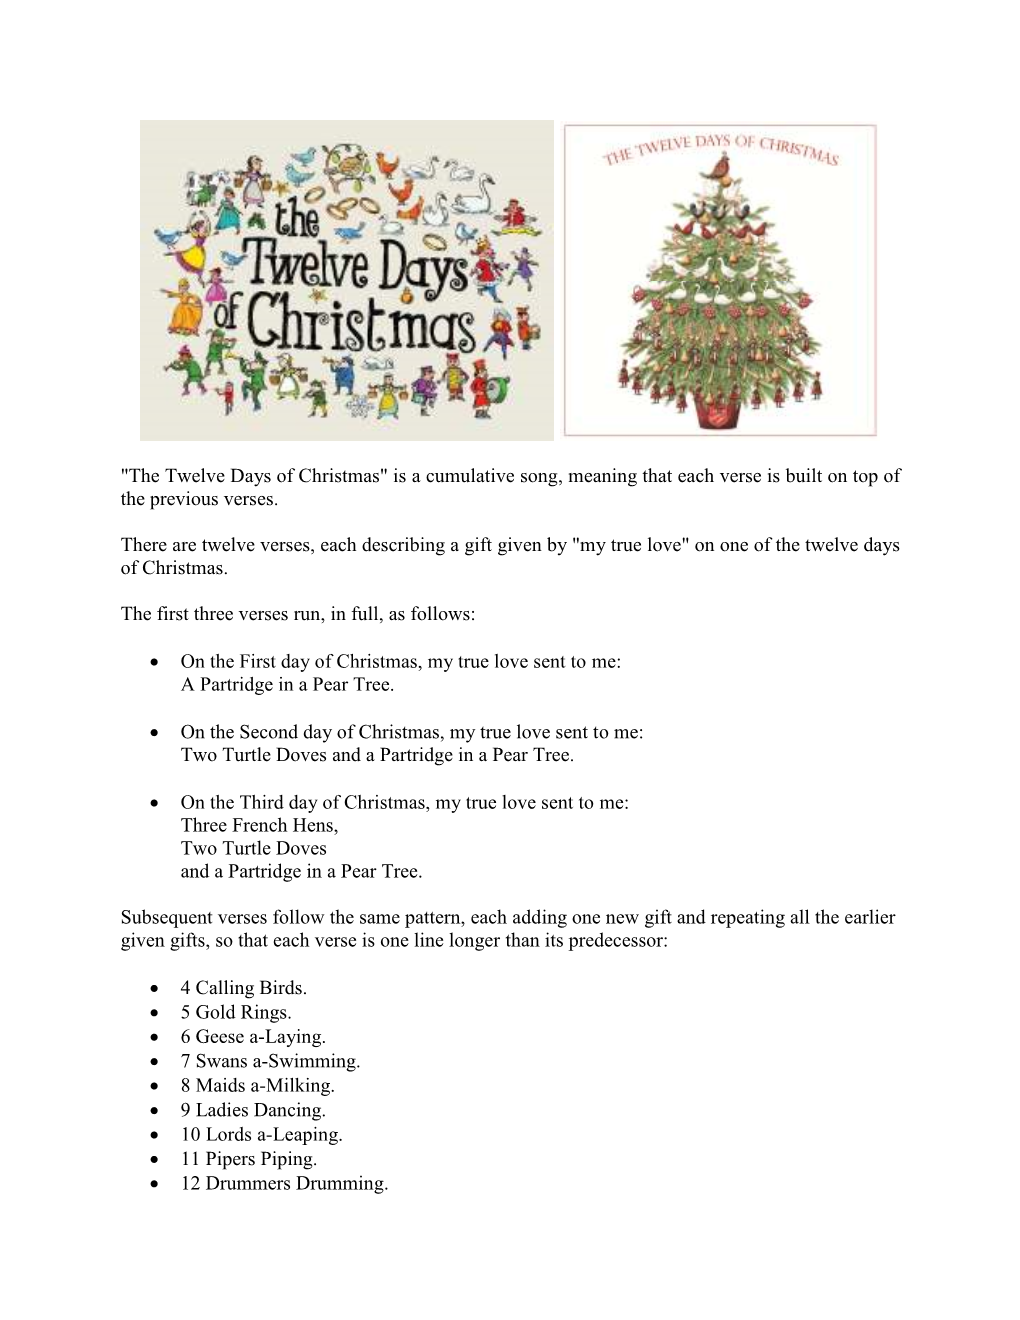 The Twelve Days of Christmas" Is a Cumulative Song, Meaning That Each Verse Is Built on Top of the Previous Verses